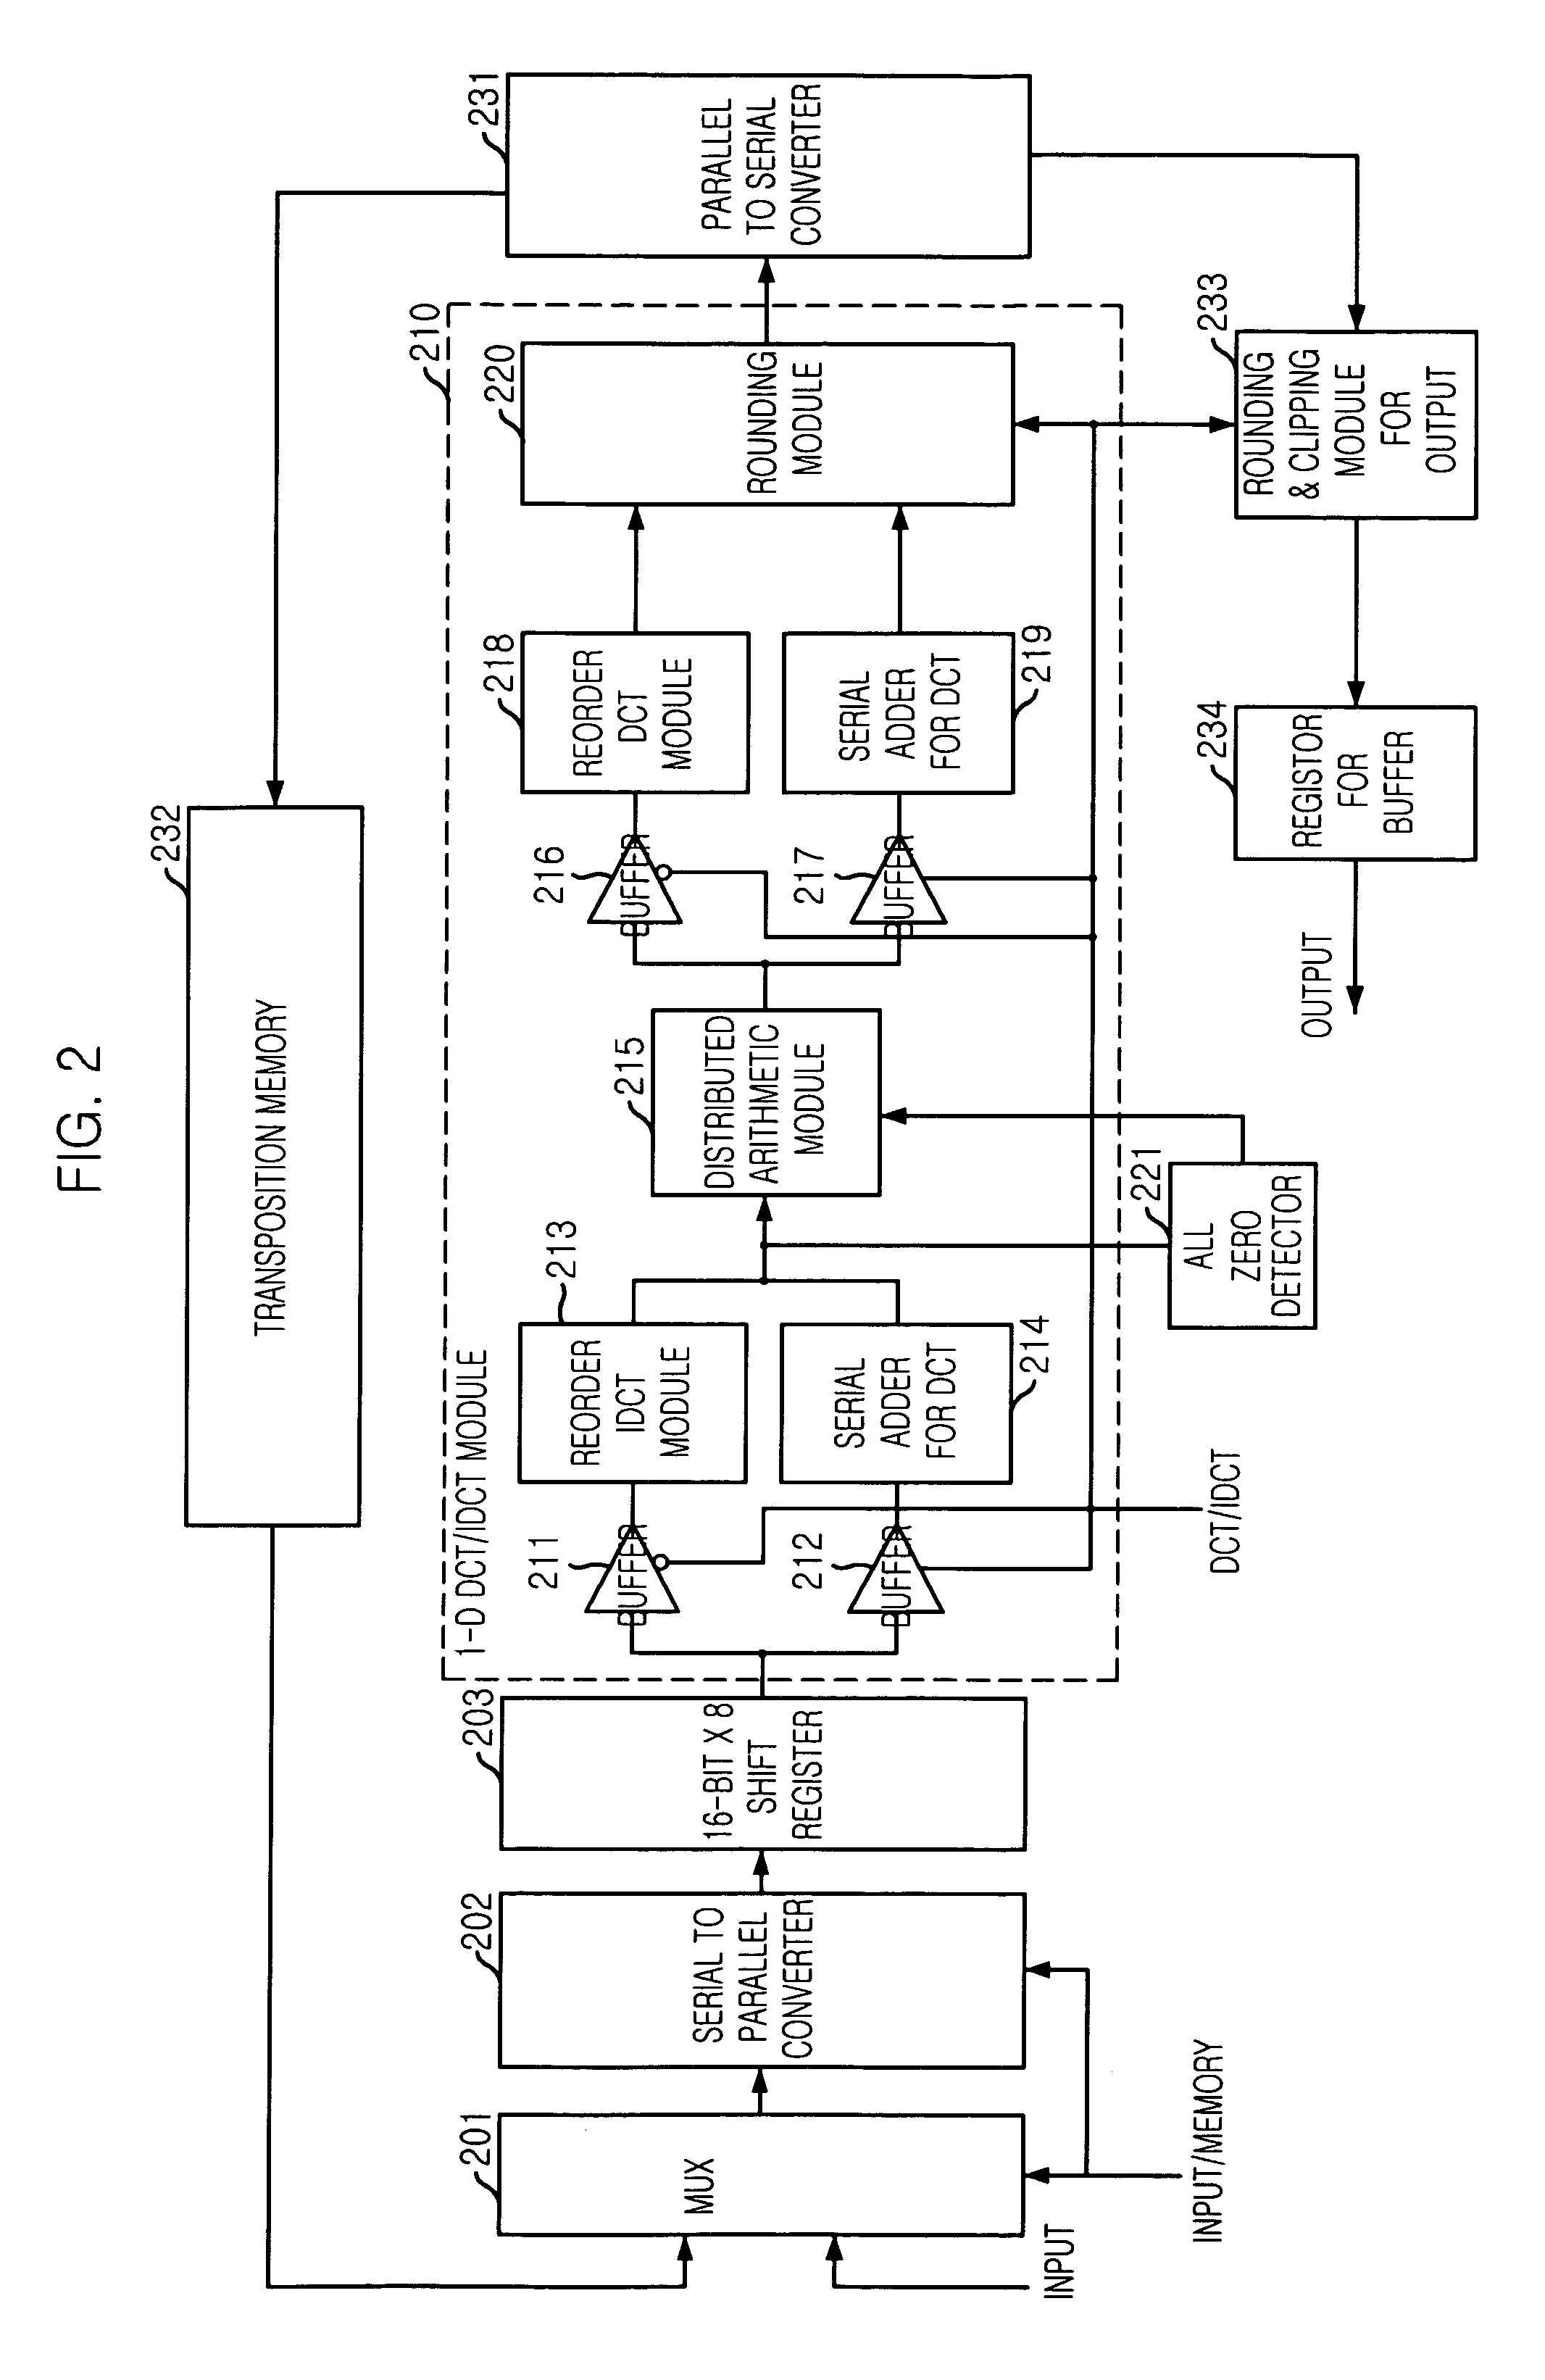 Apparatus and method for 2-D discrete transform using distributed arithmetic module